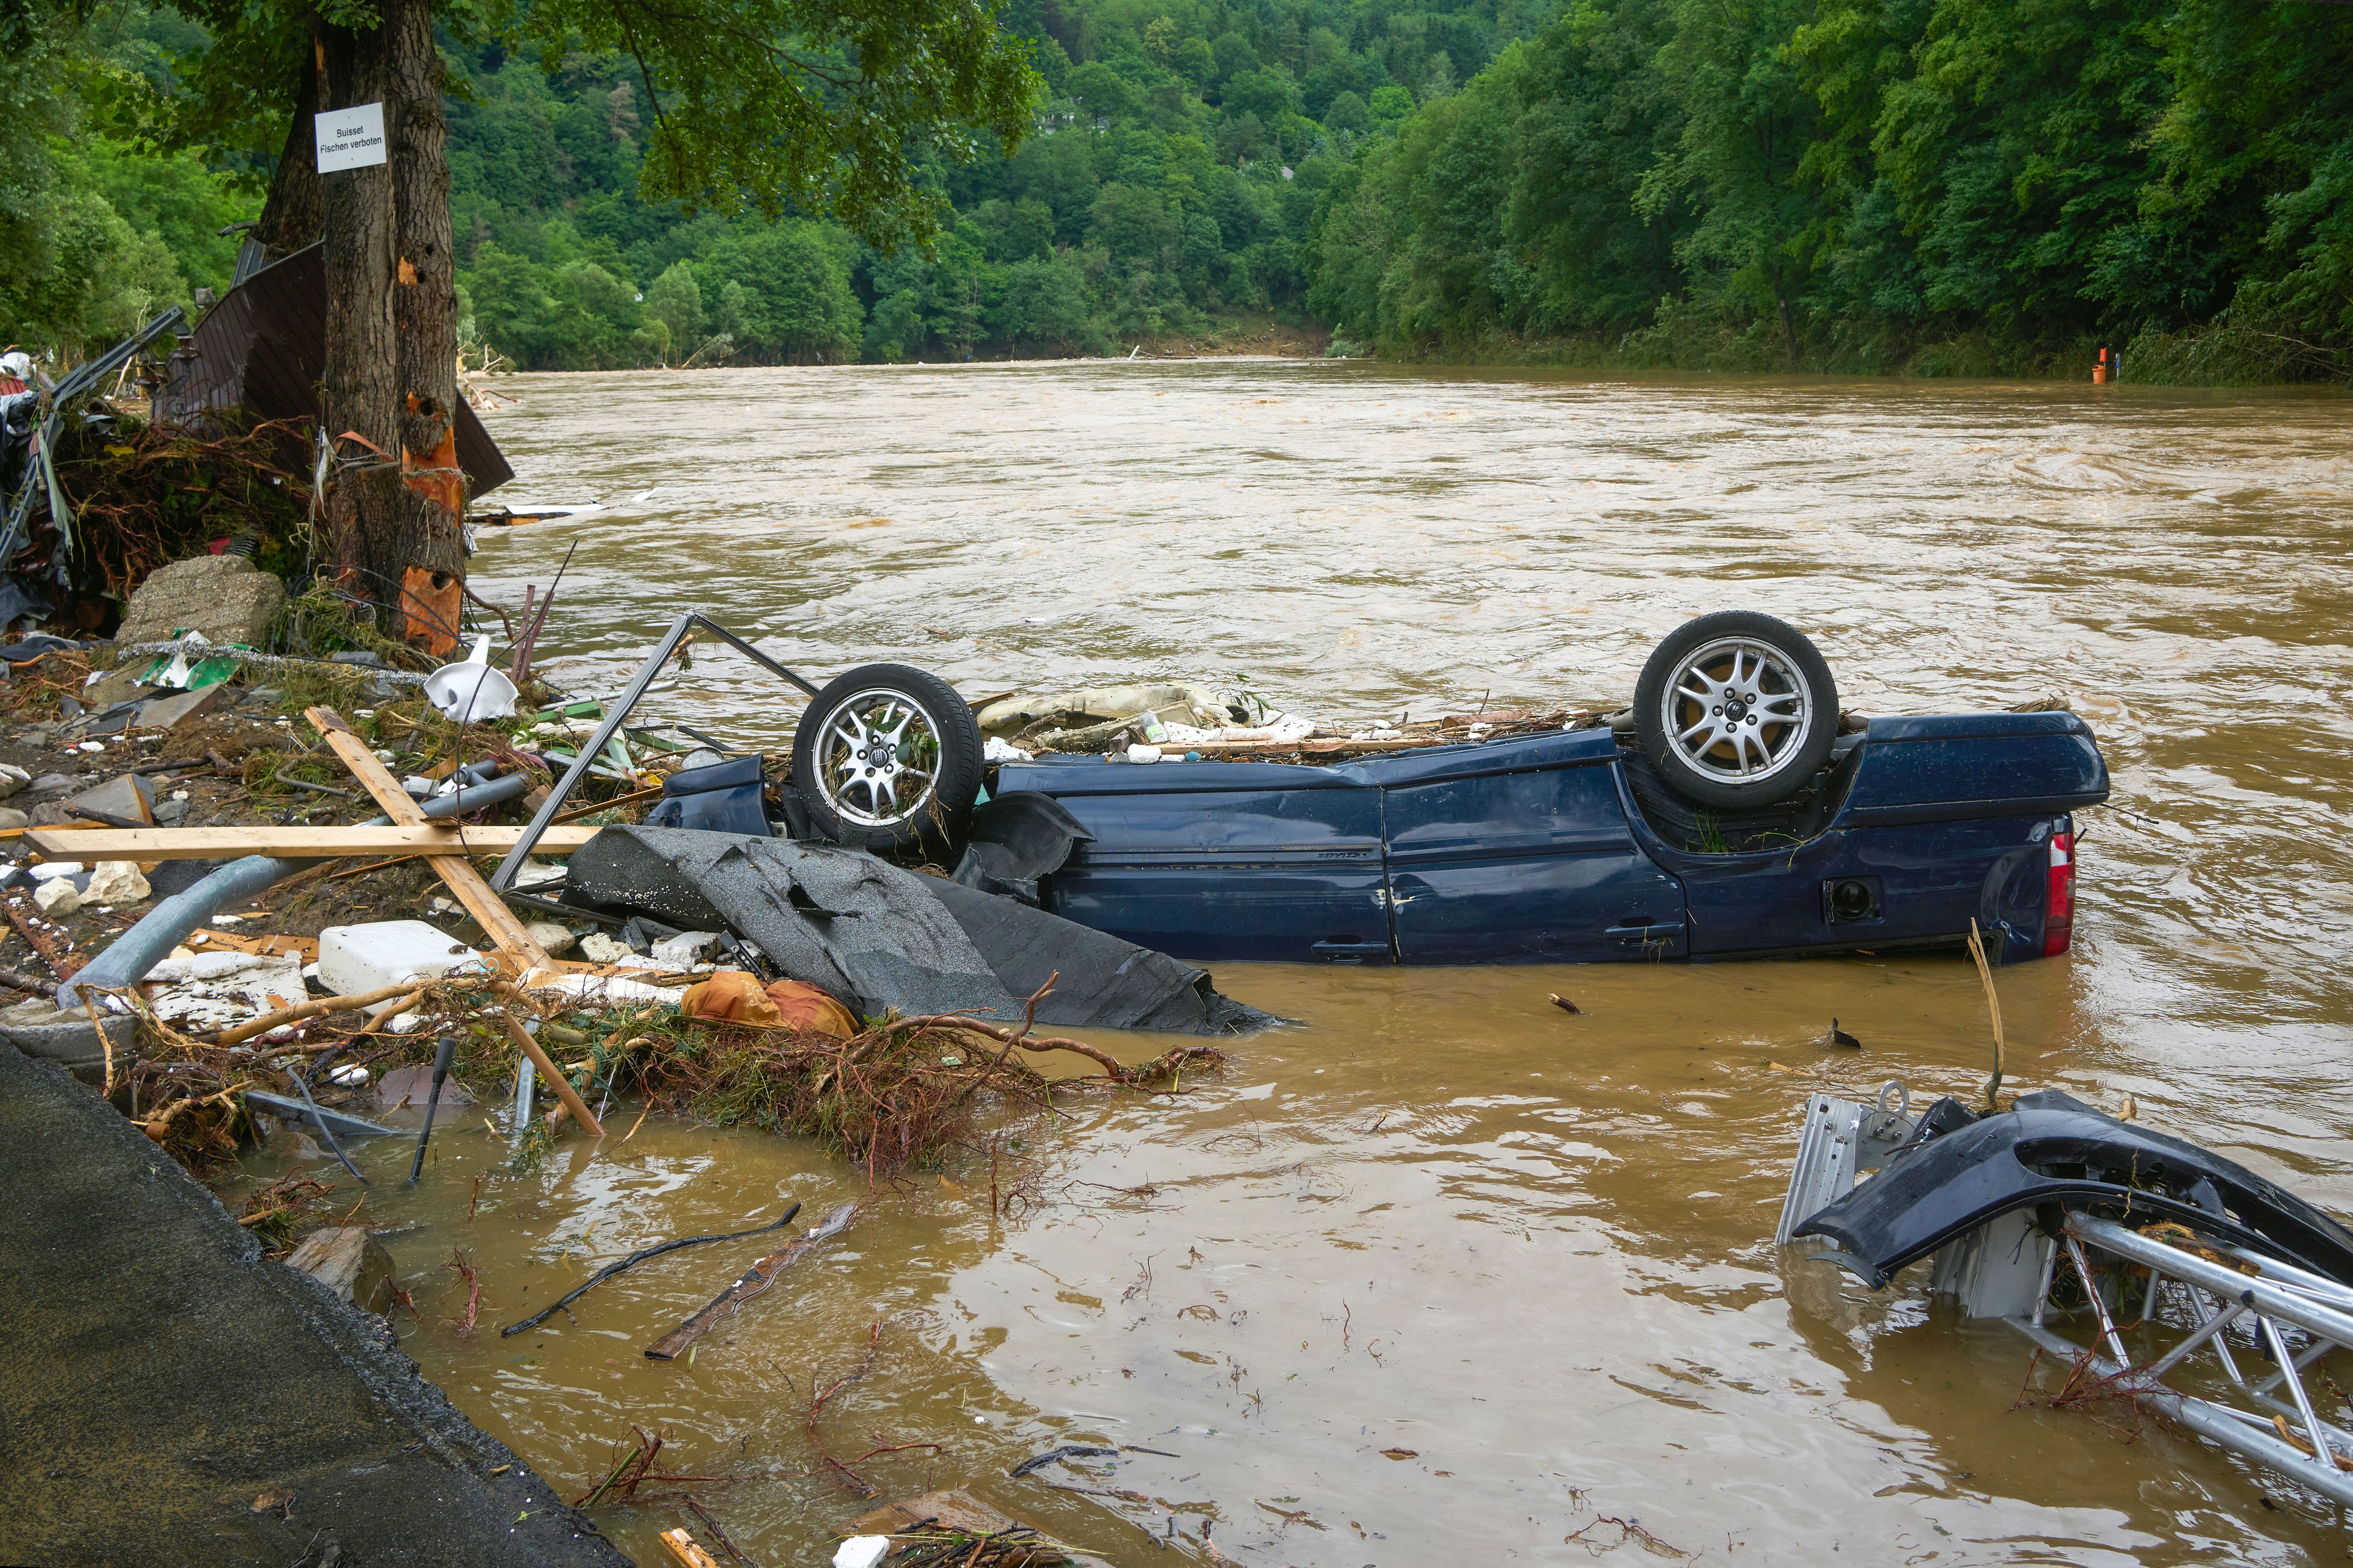 A destroyed car lies in the Ahr river in the village in the district of Ahrweiler.